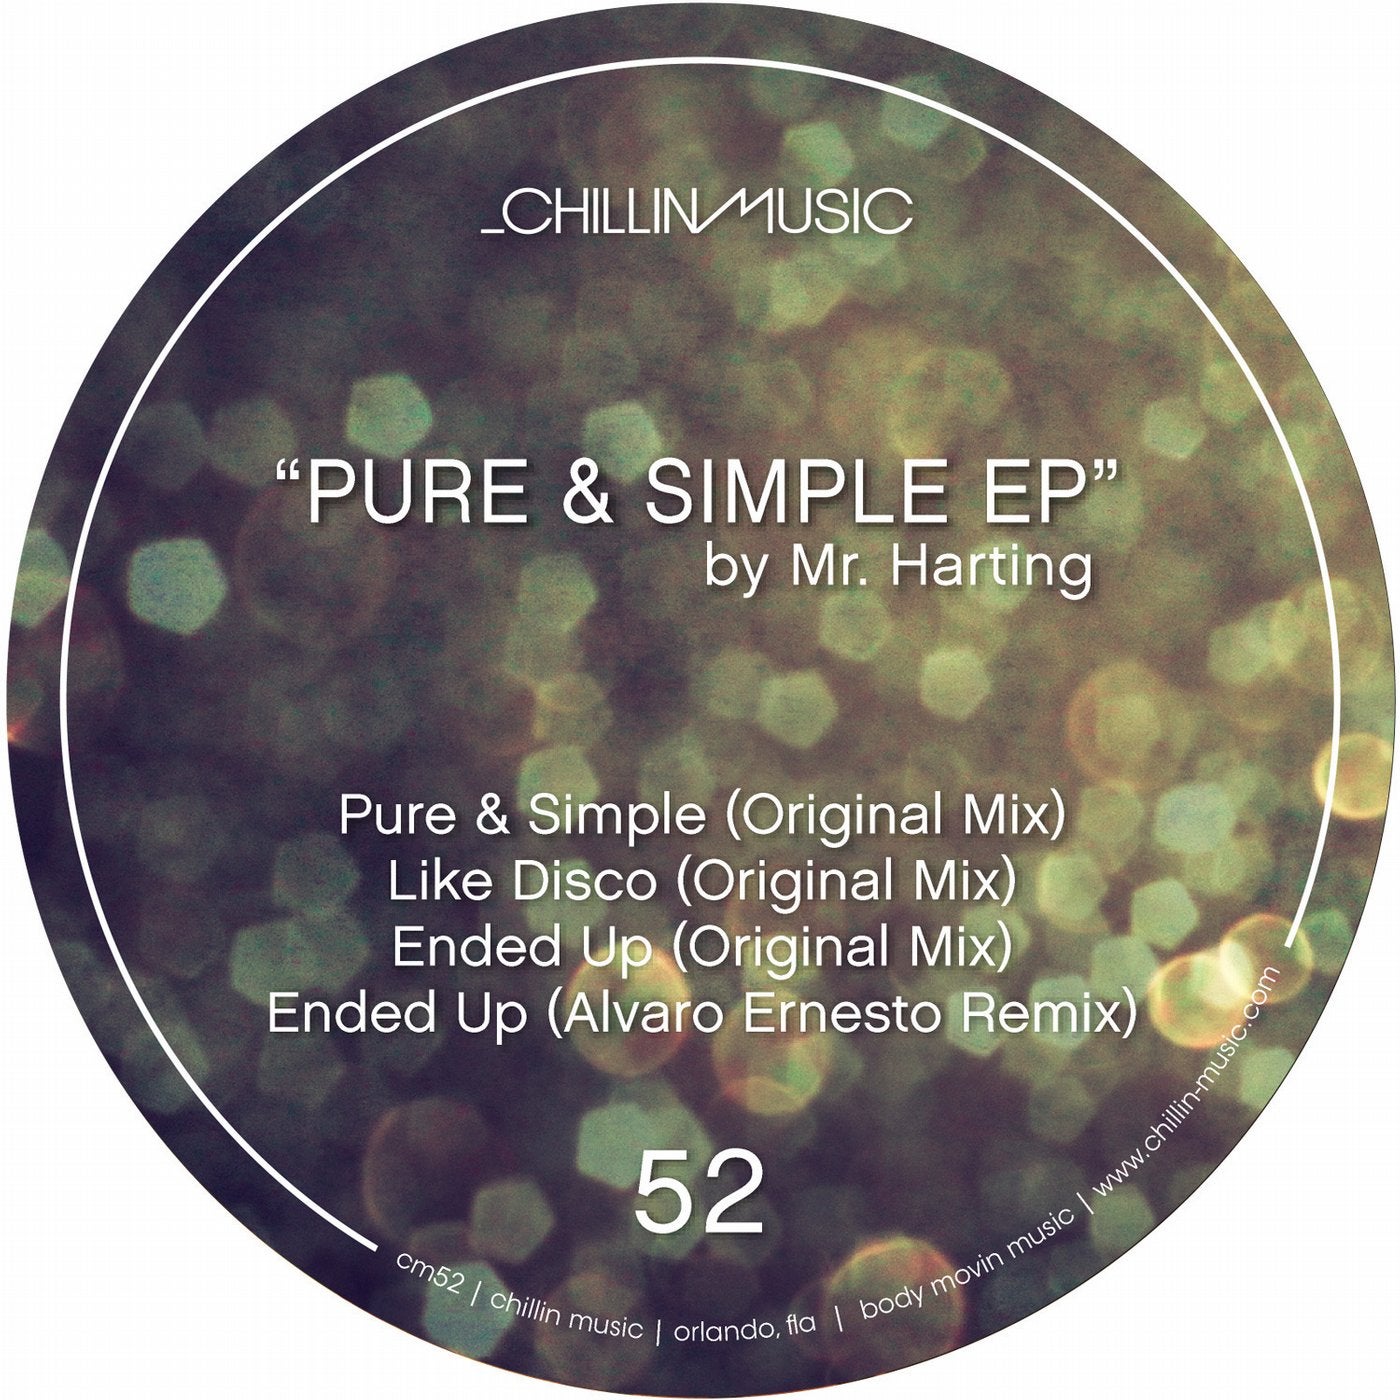 Pure & Simple EP